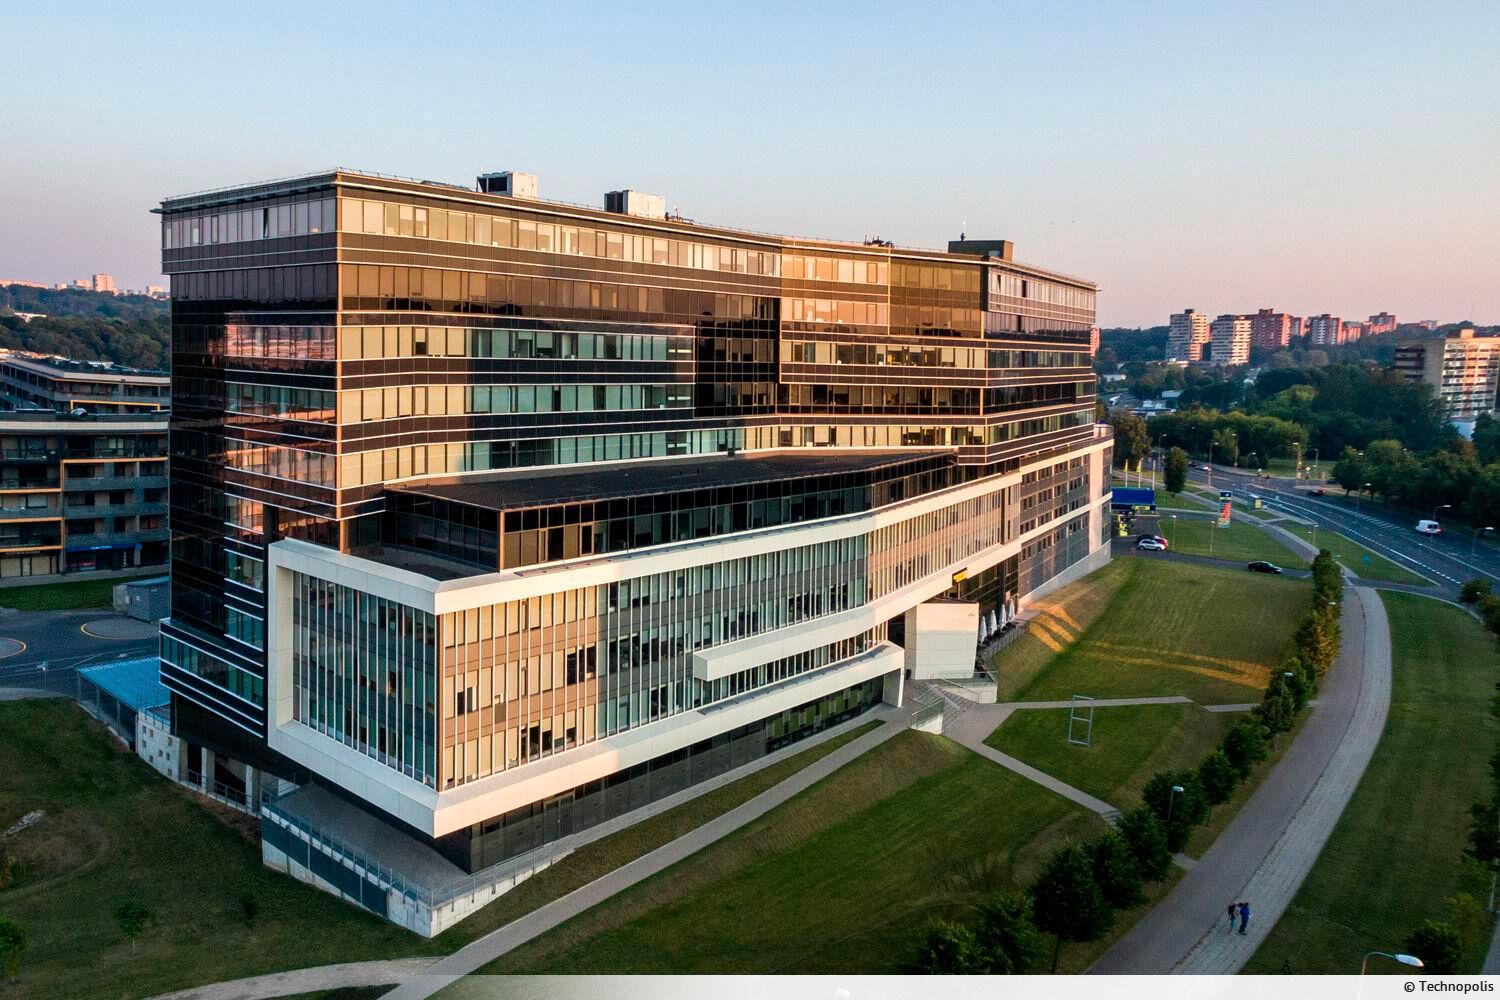 Bright and modern office premises from 60 sqm up to 2000 sqm on the same floor is available now. The premises are located in BETA building in Technopolis campus in Vilnius.